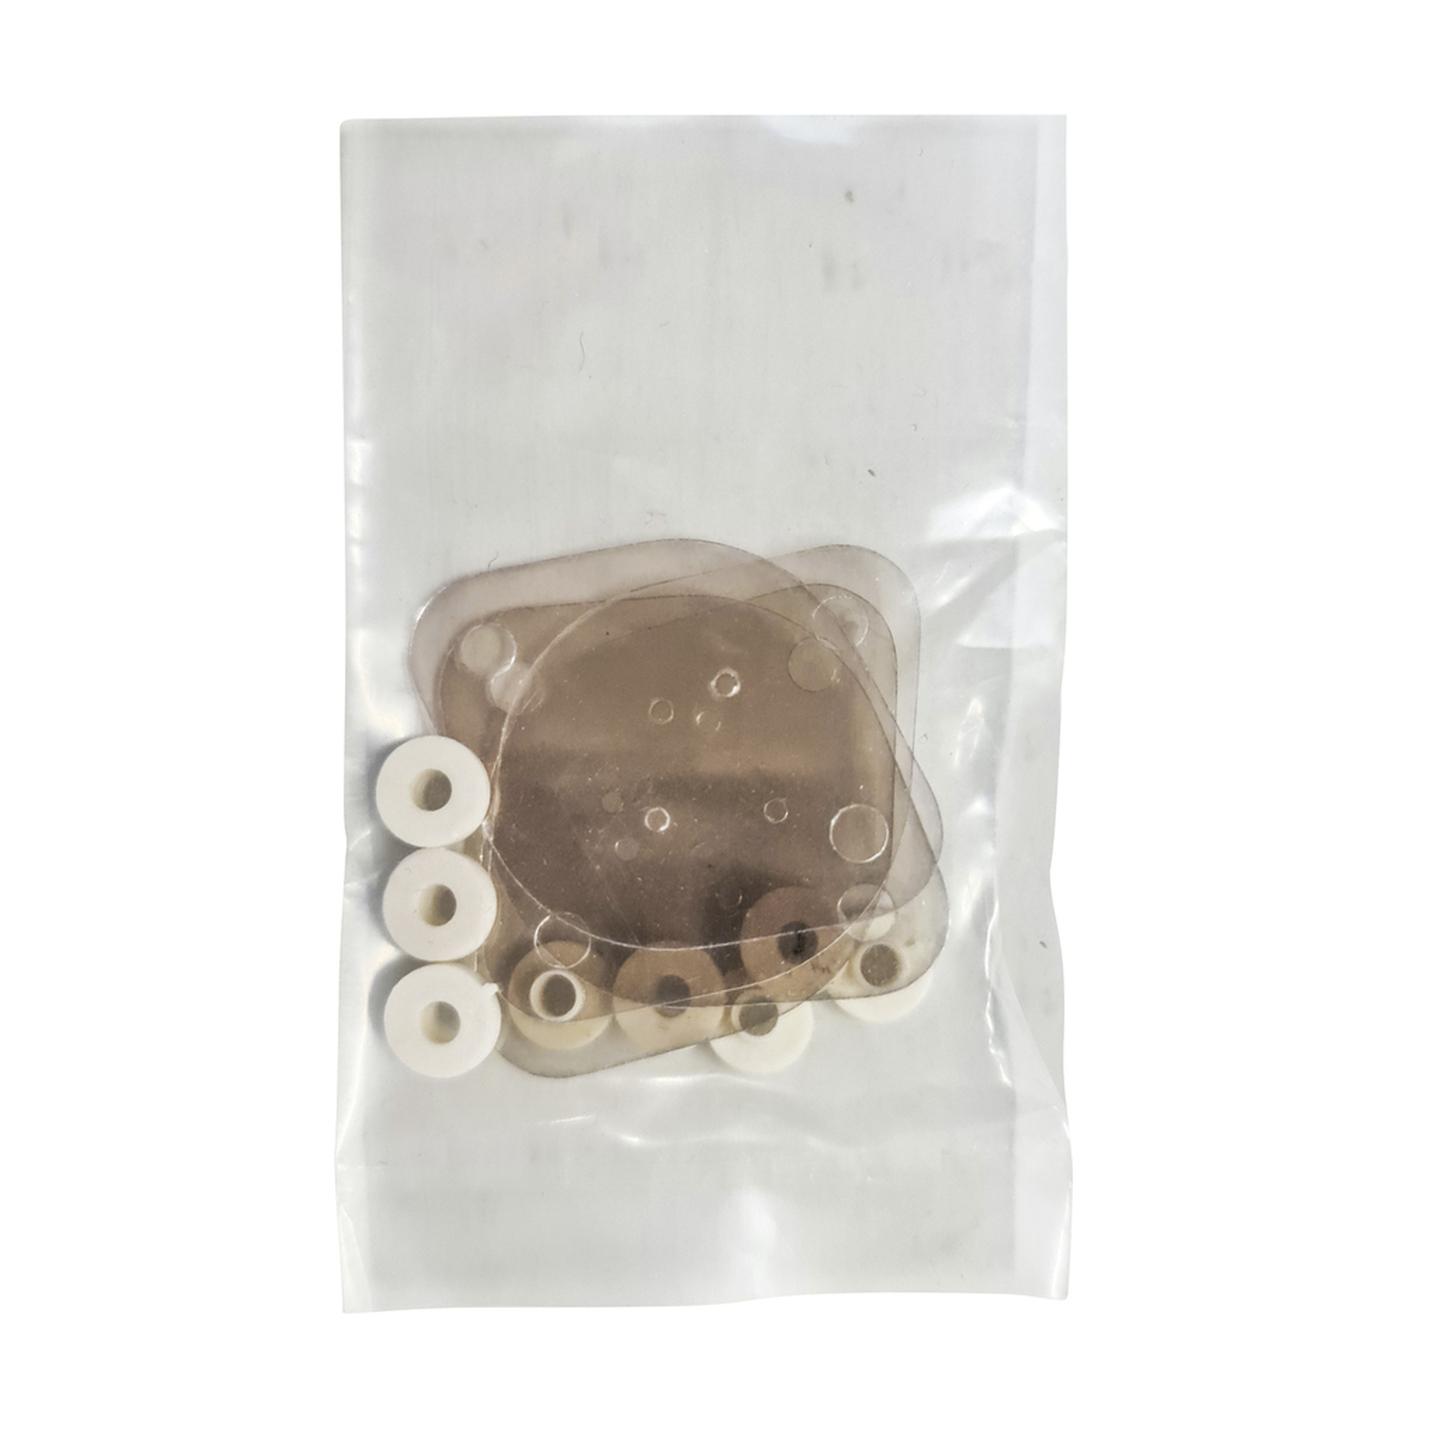 TO-3 Mica Transistor Insulating Washers - Pack of 4